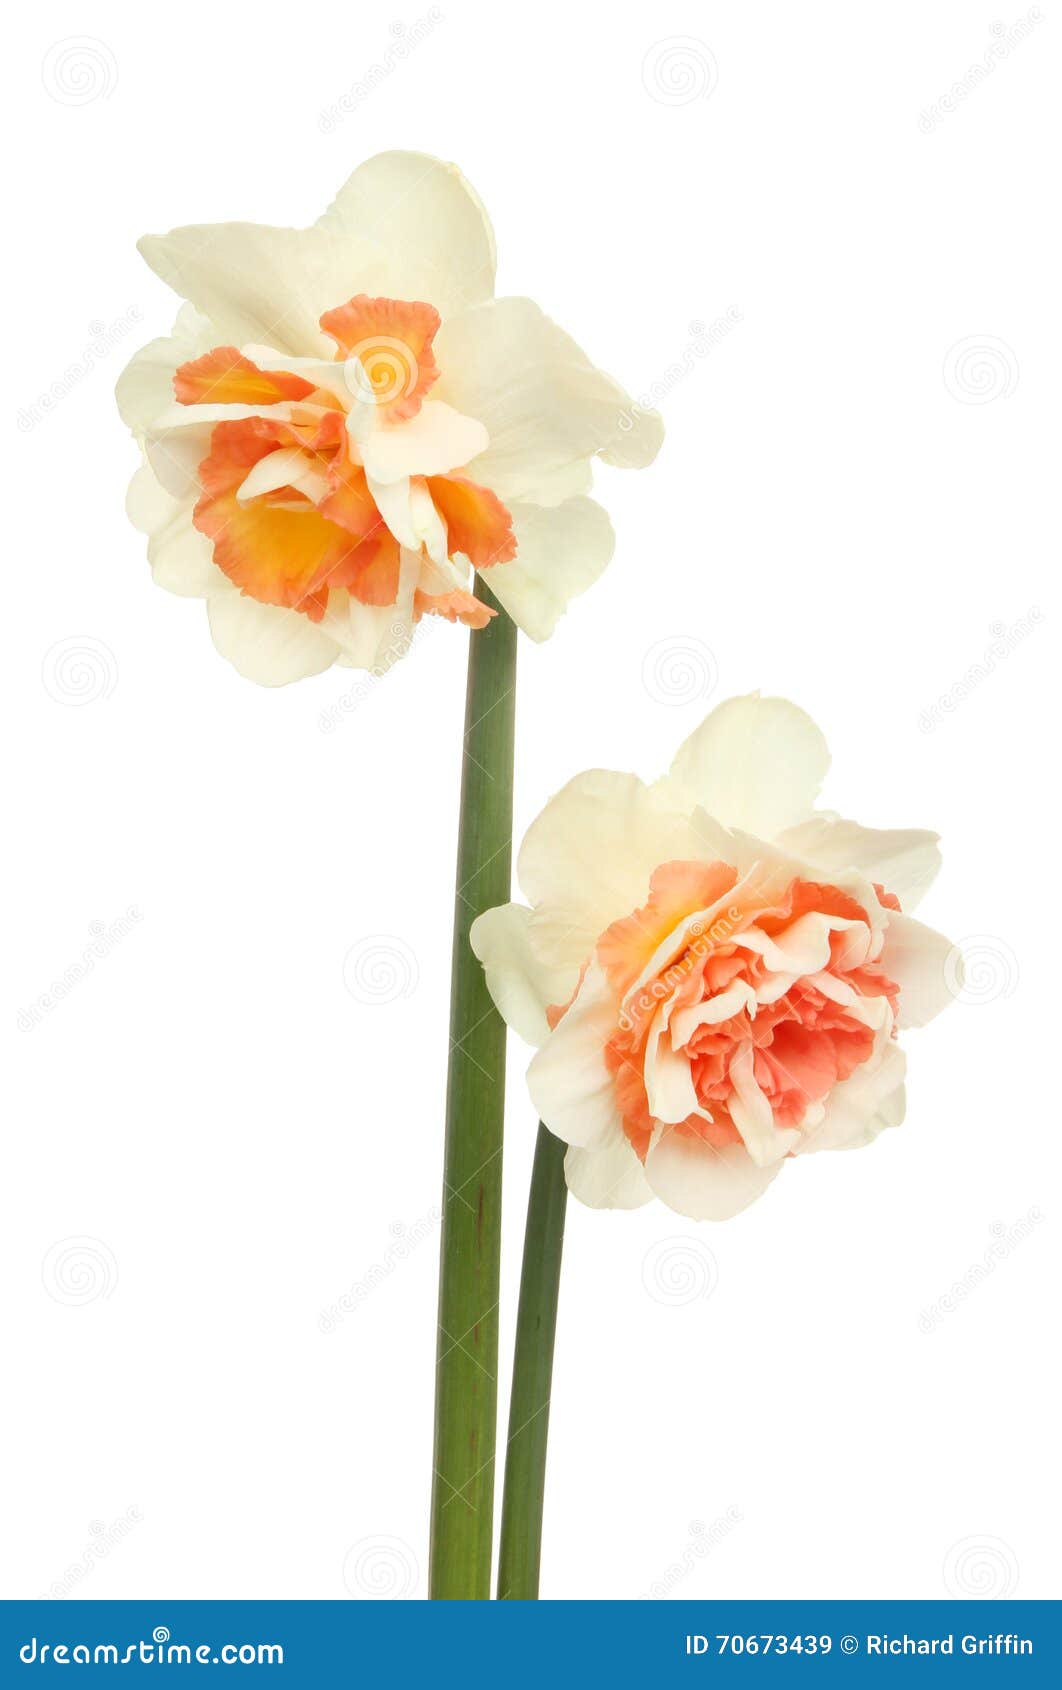 two frilly daffodils